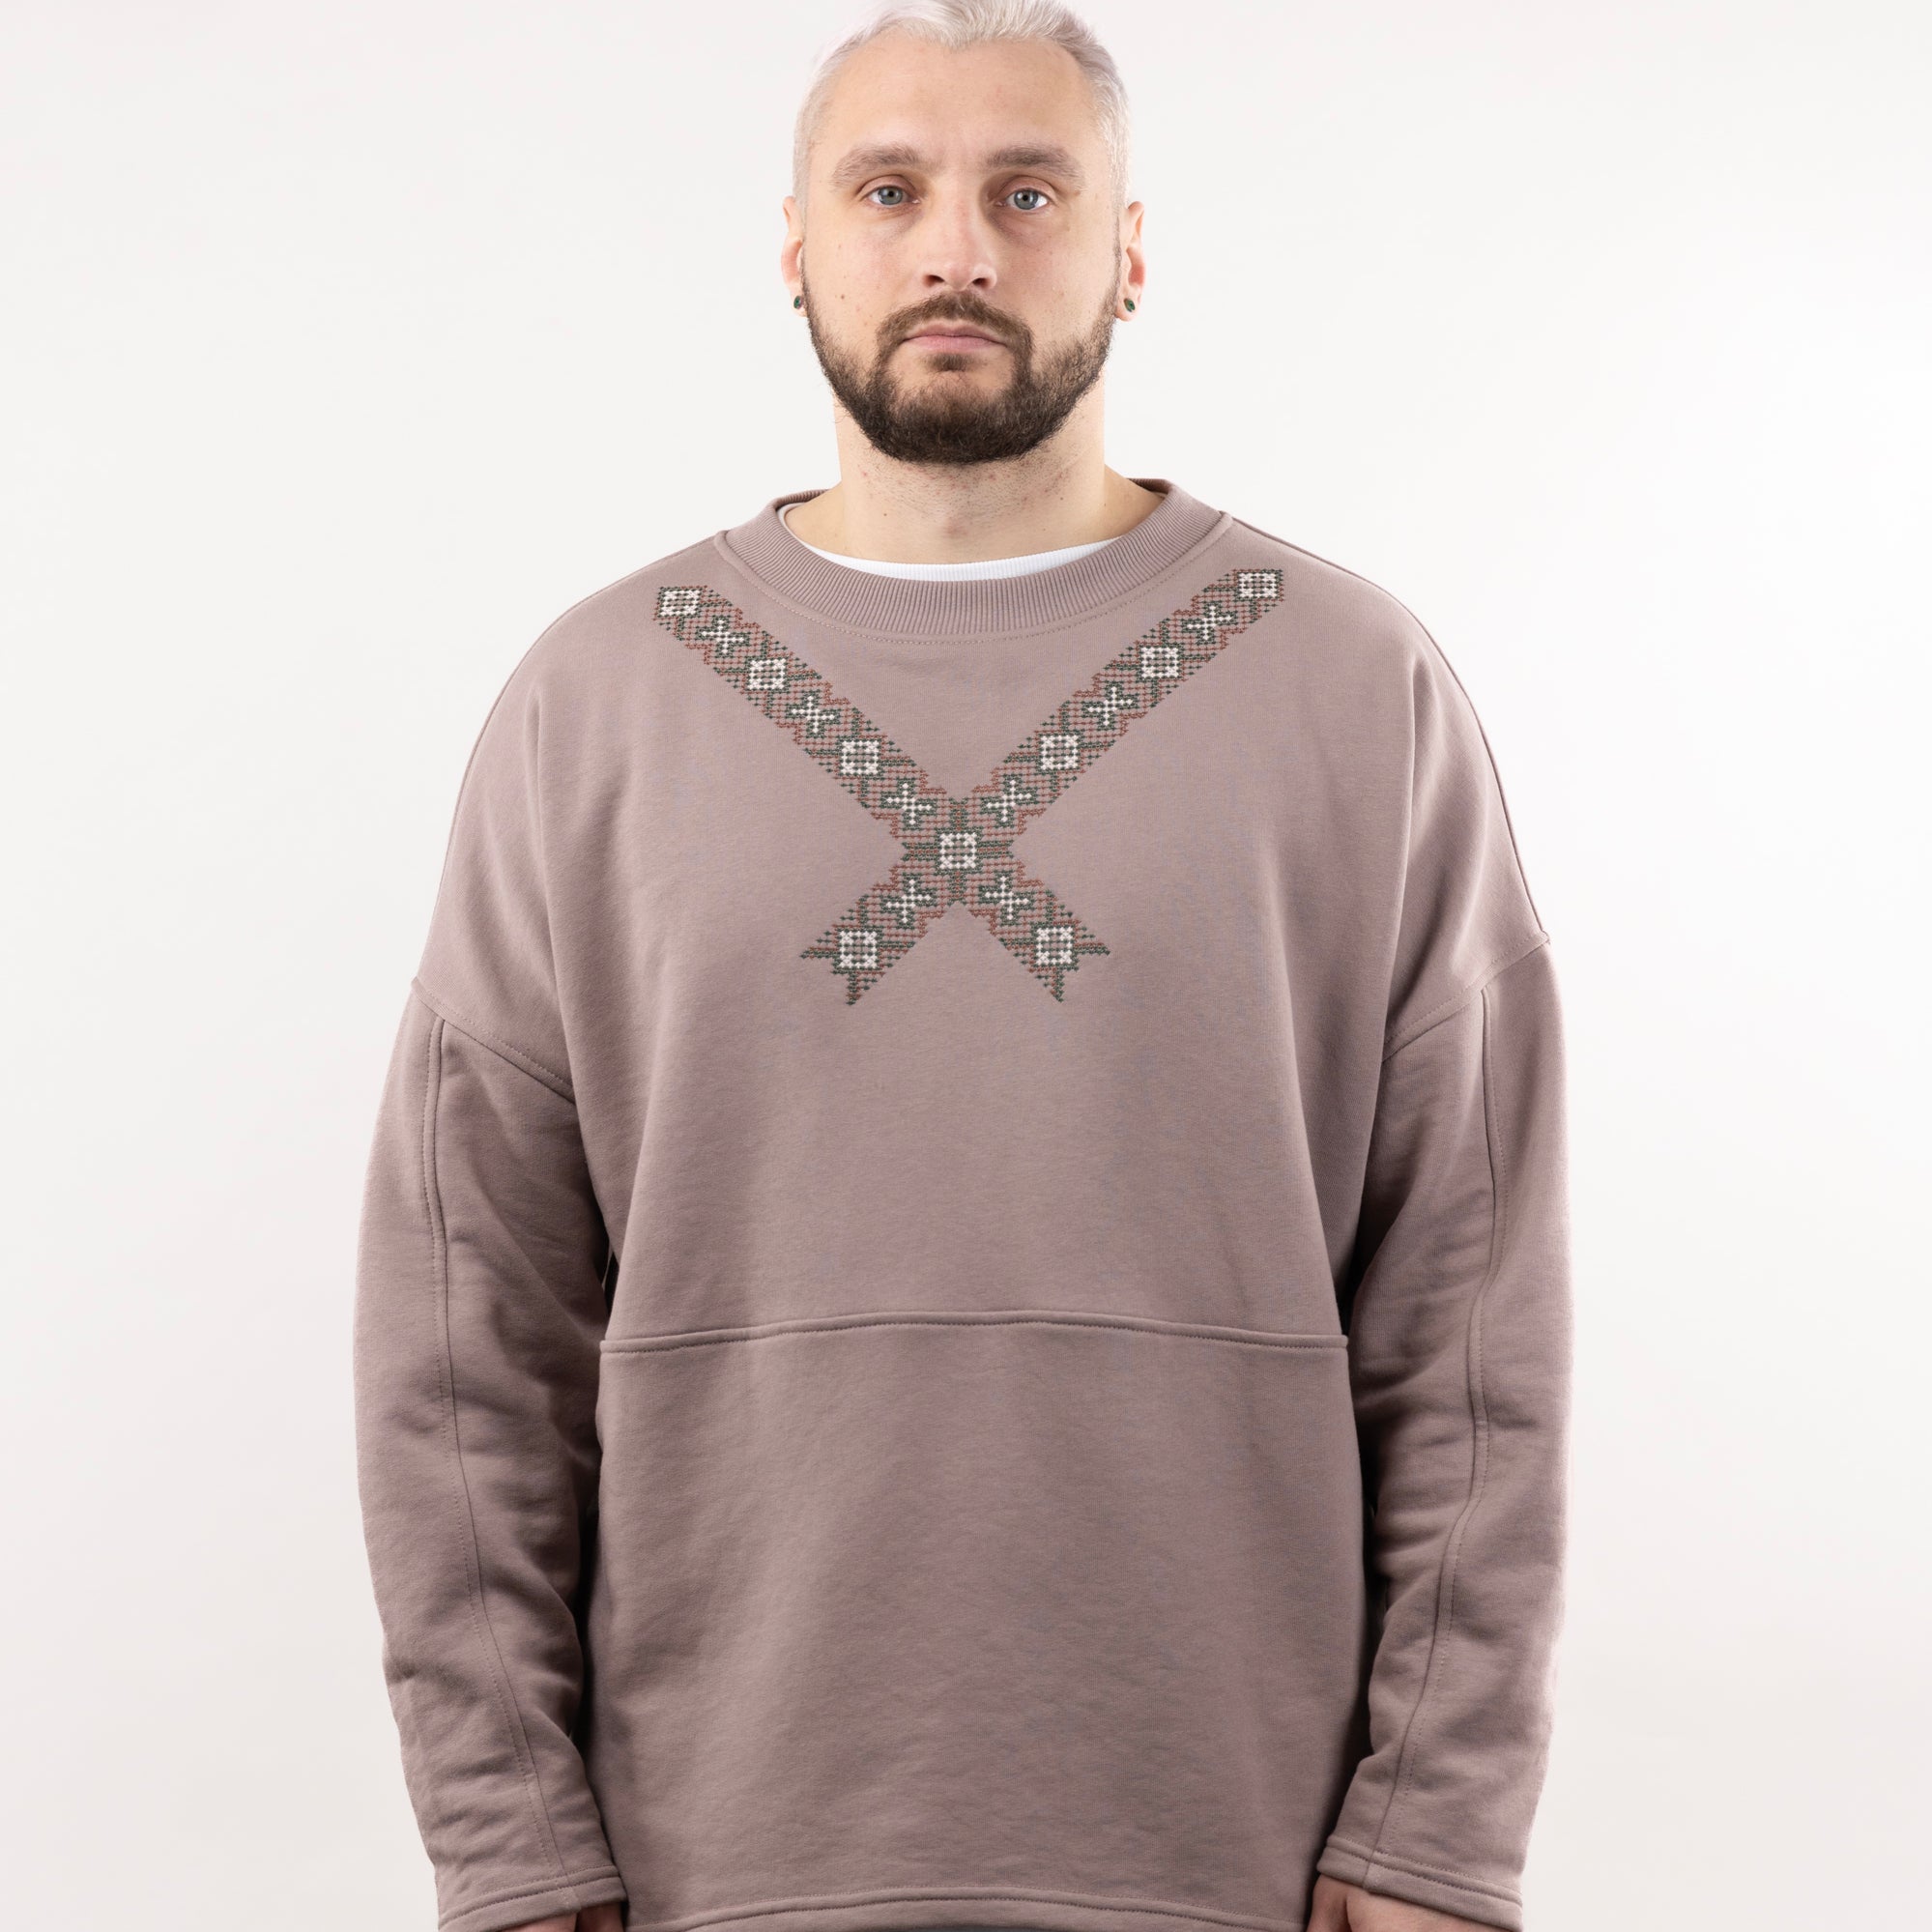 Sweatshirt "Dream" With Embroidery For Men